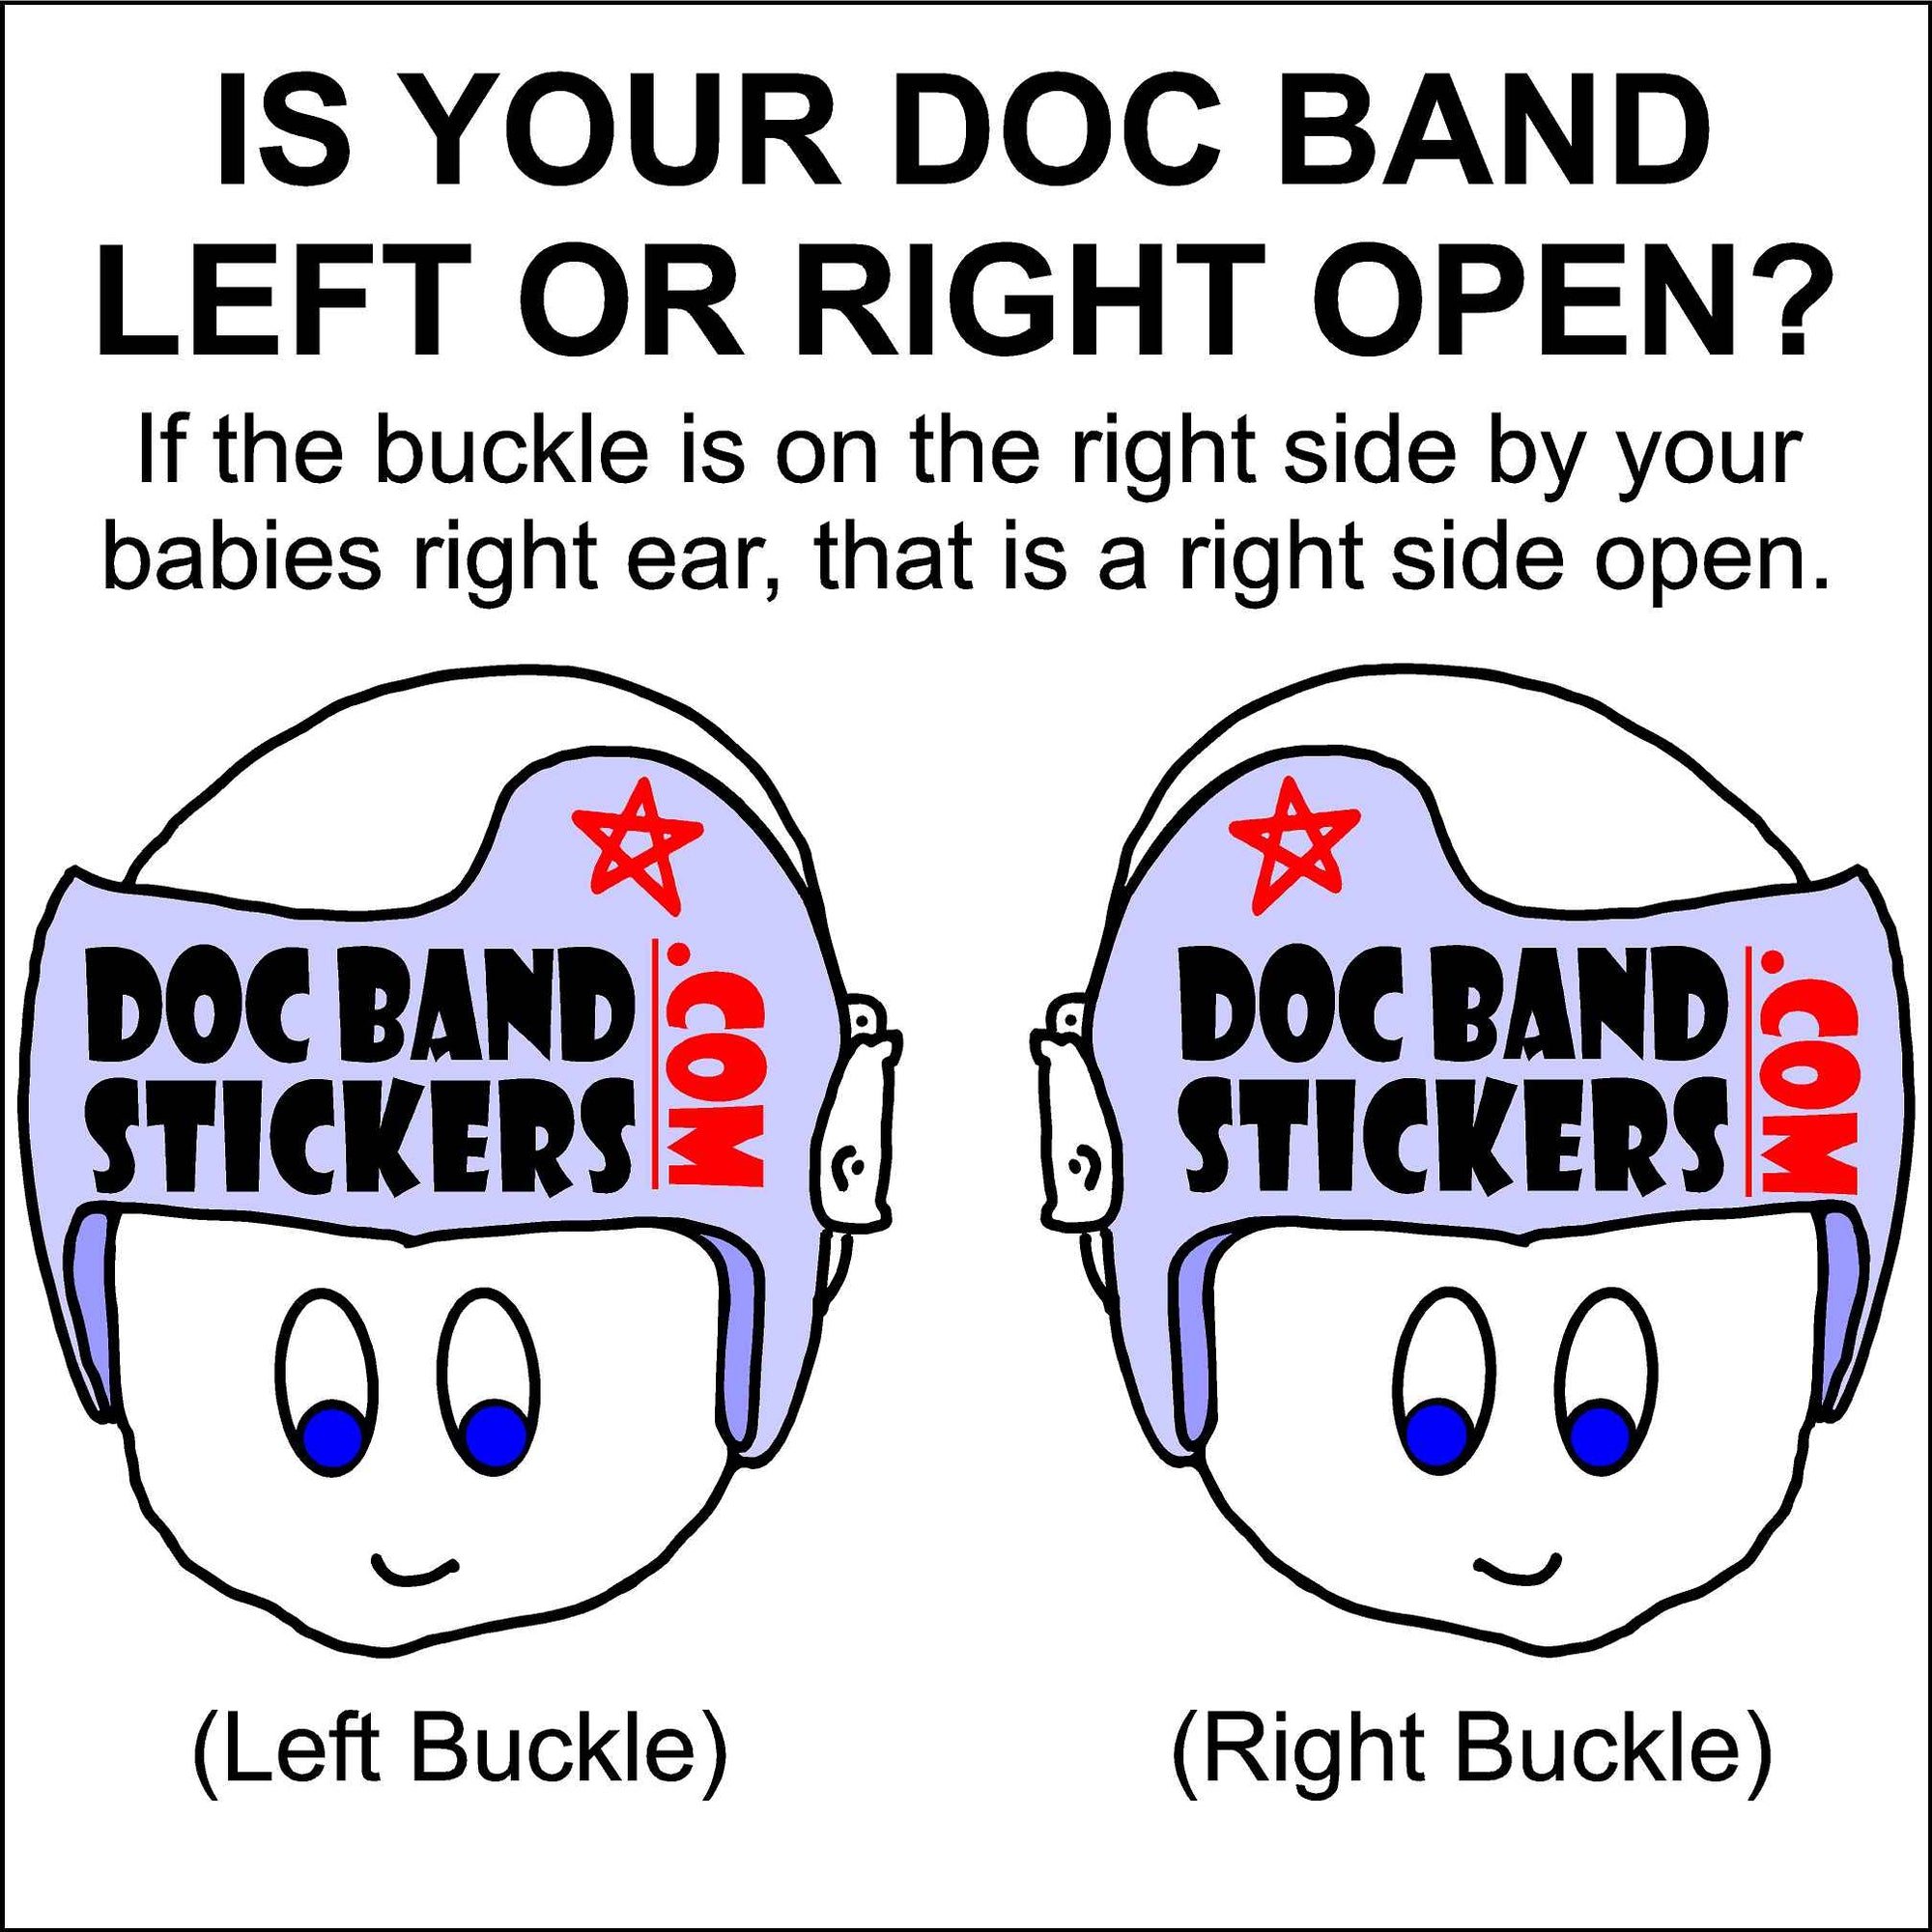 How to apply a Doc Band Wrap